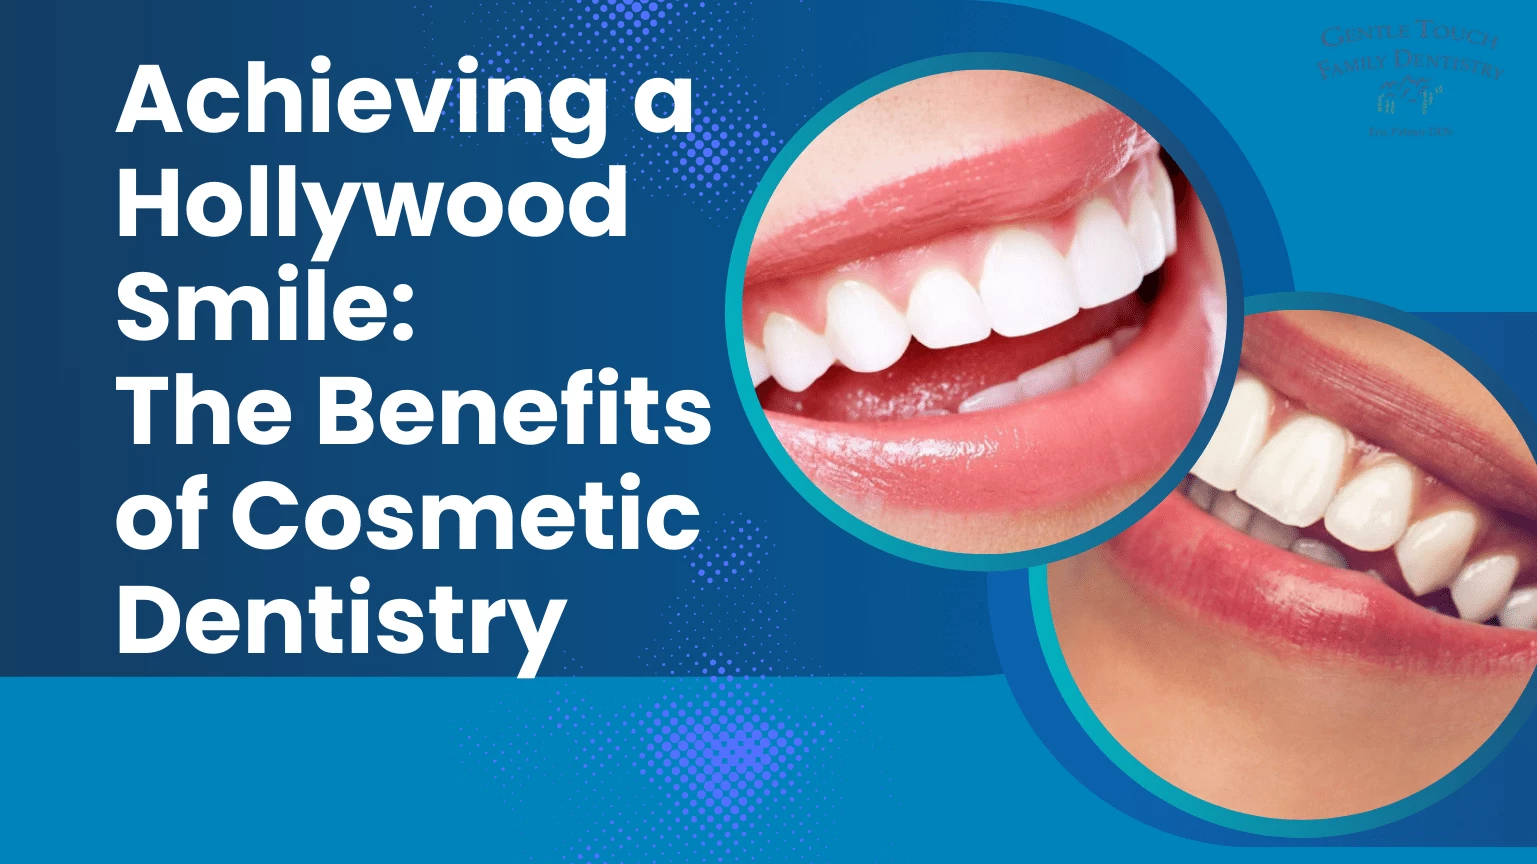 Achieving a Hollywood Smile: The Benefits of Cosmetic Dentistry